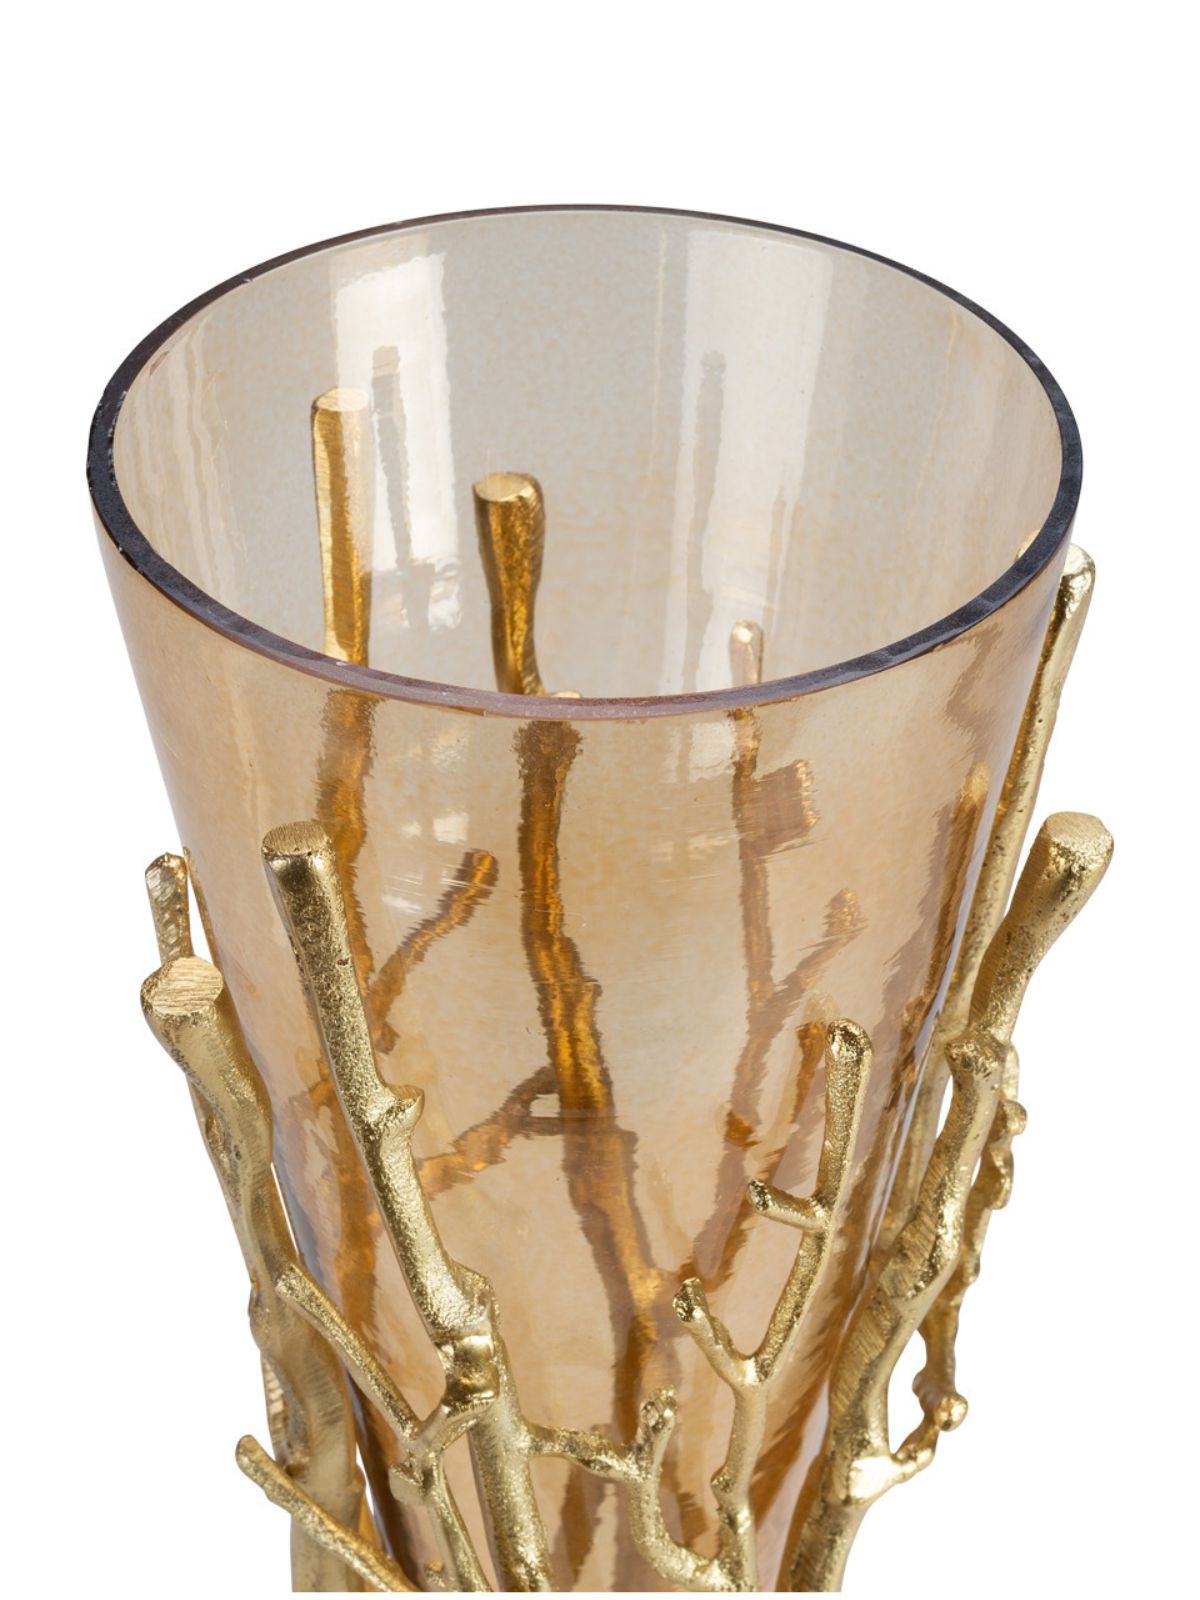 27H golden floral vase decorative centerpiece featuring a gold tree branch metal base with a glass vase insert. 